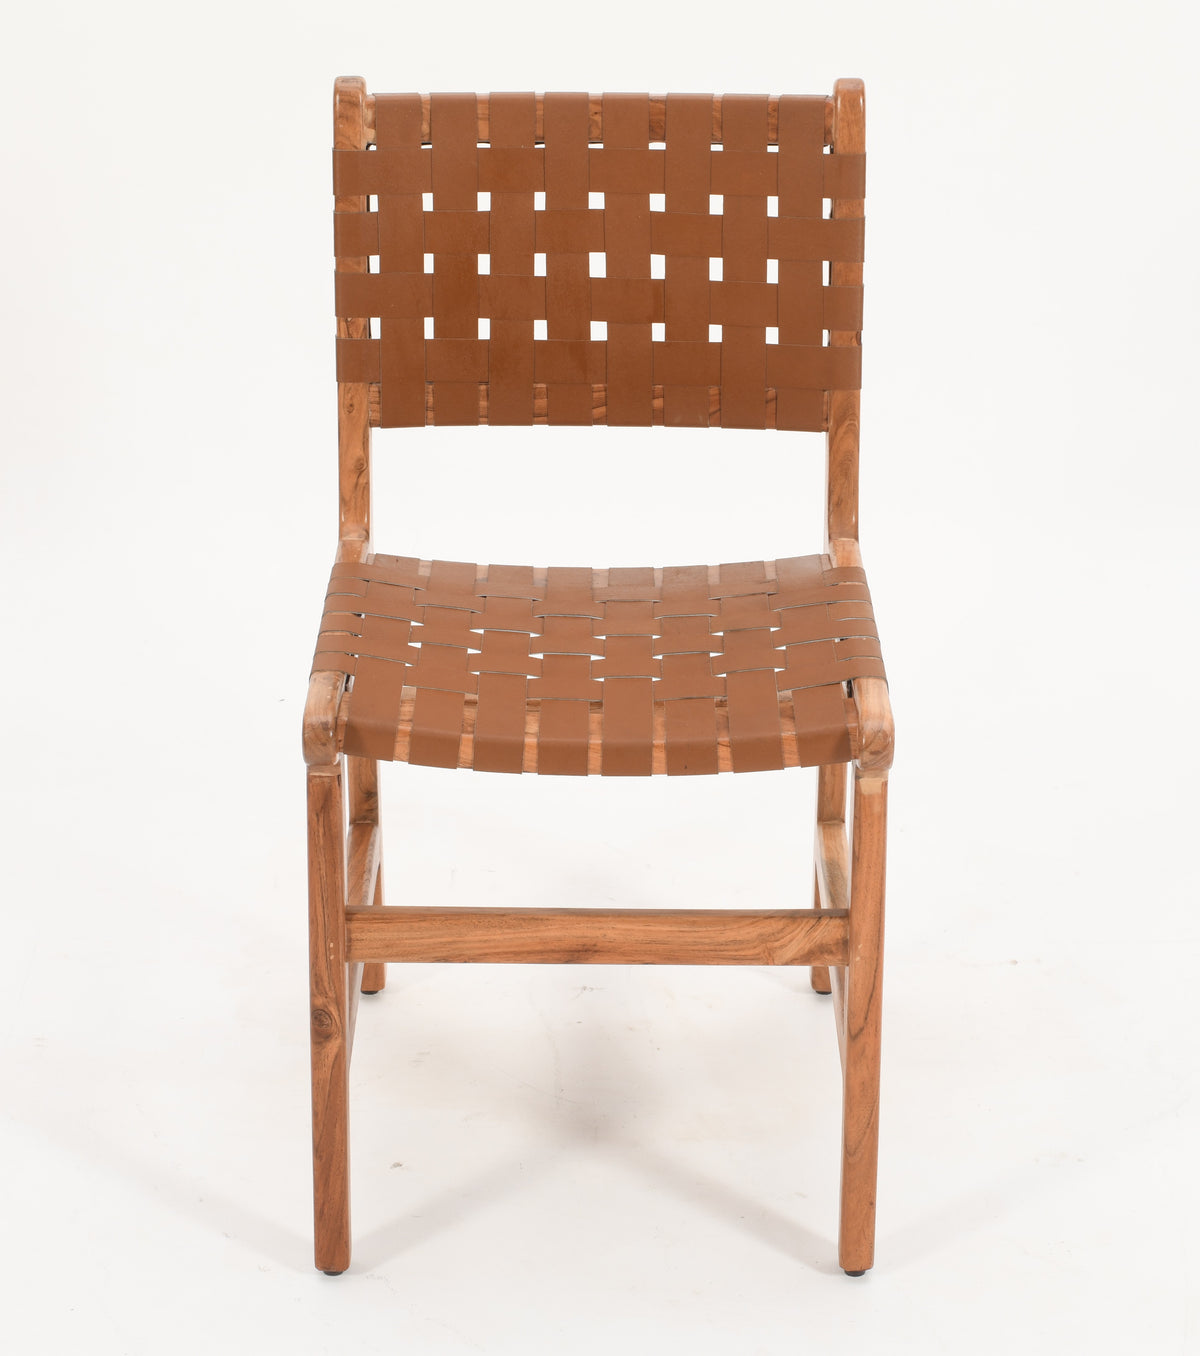 2 x Solid Acacia Wood Dining Chairs | Woven Tan Leather (Set of 2)